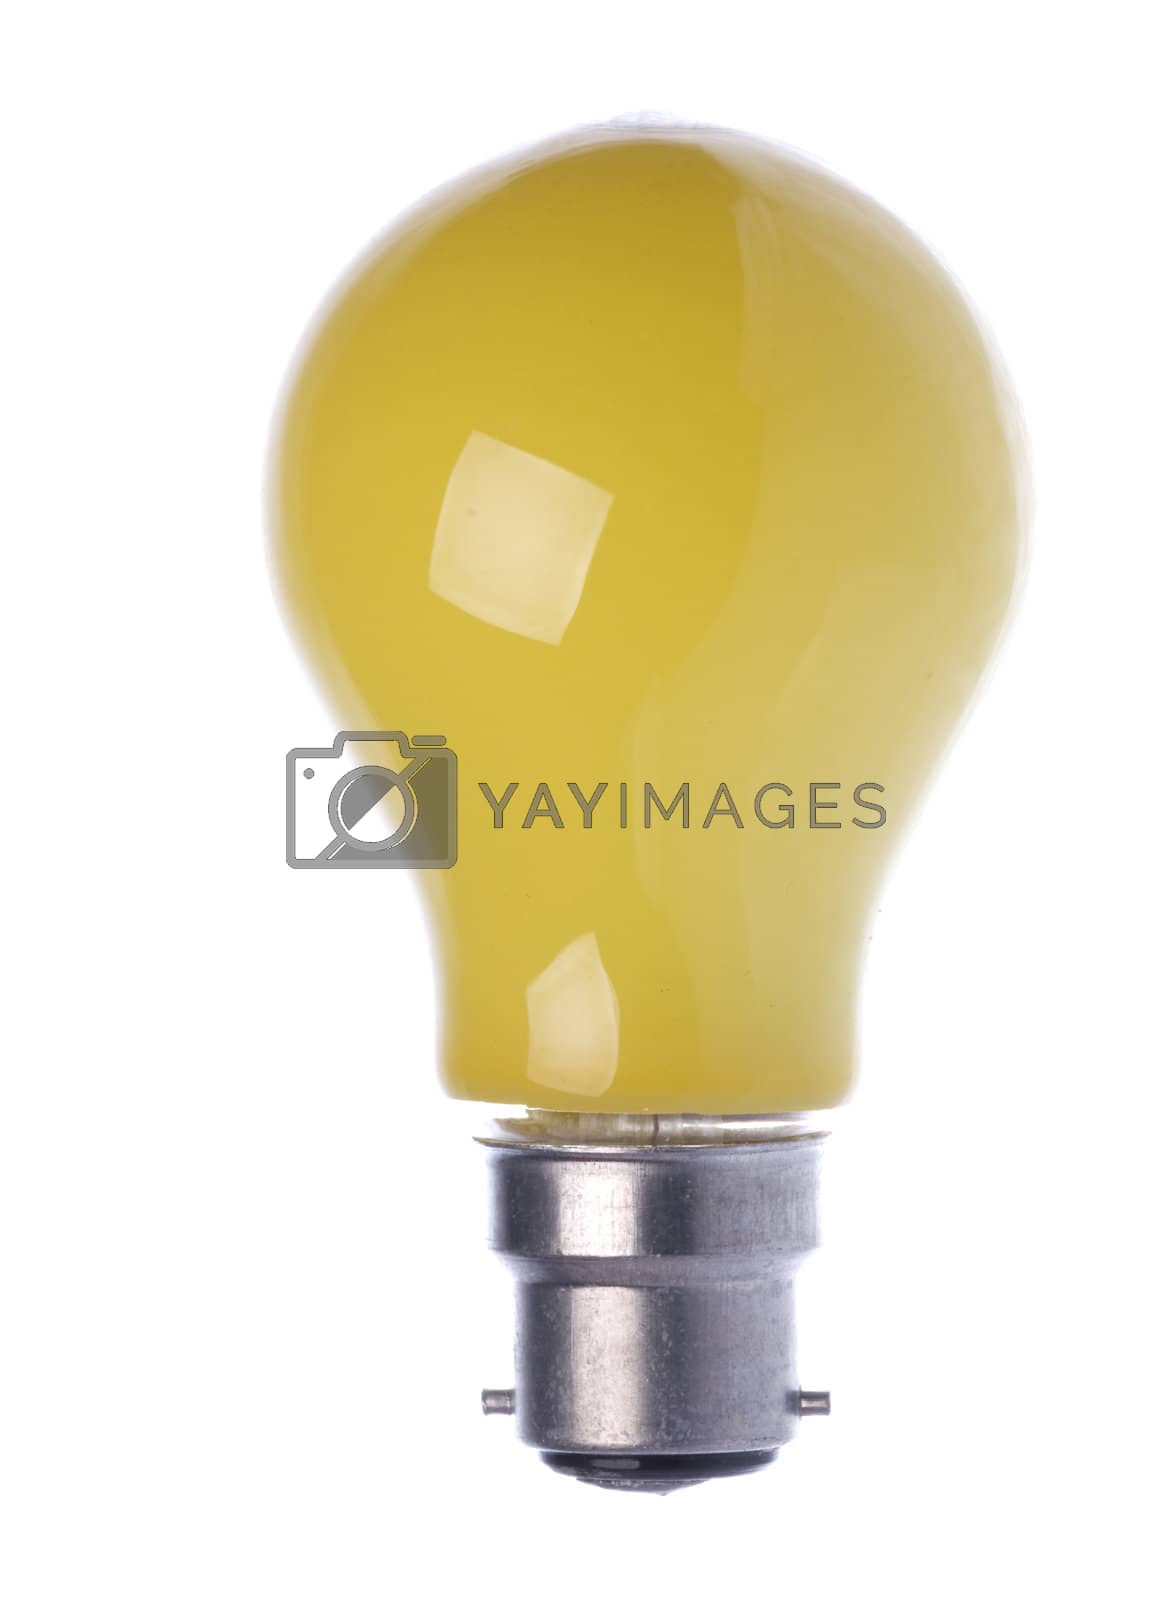 Royalty free image of Yellow Light Bulb Isolated by shariffc